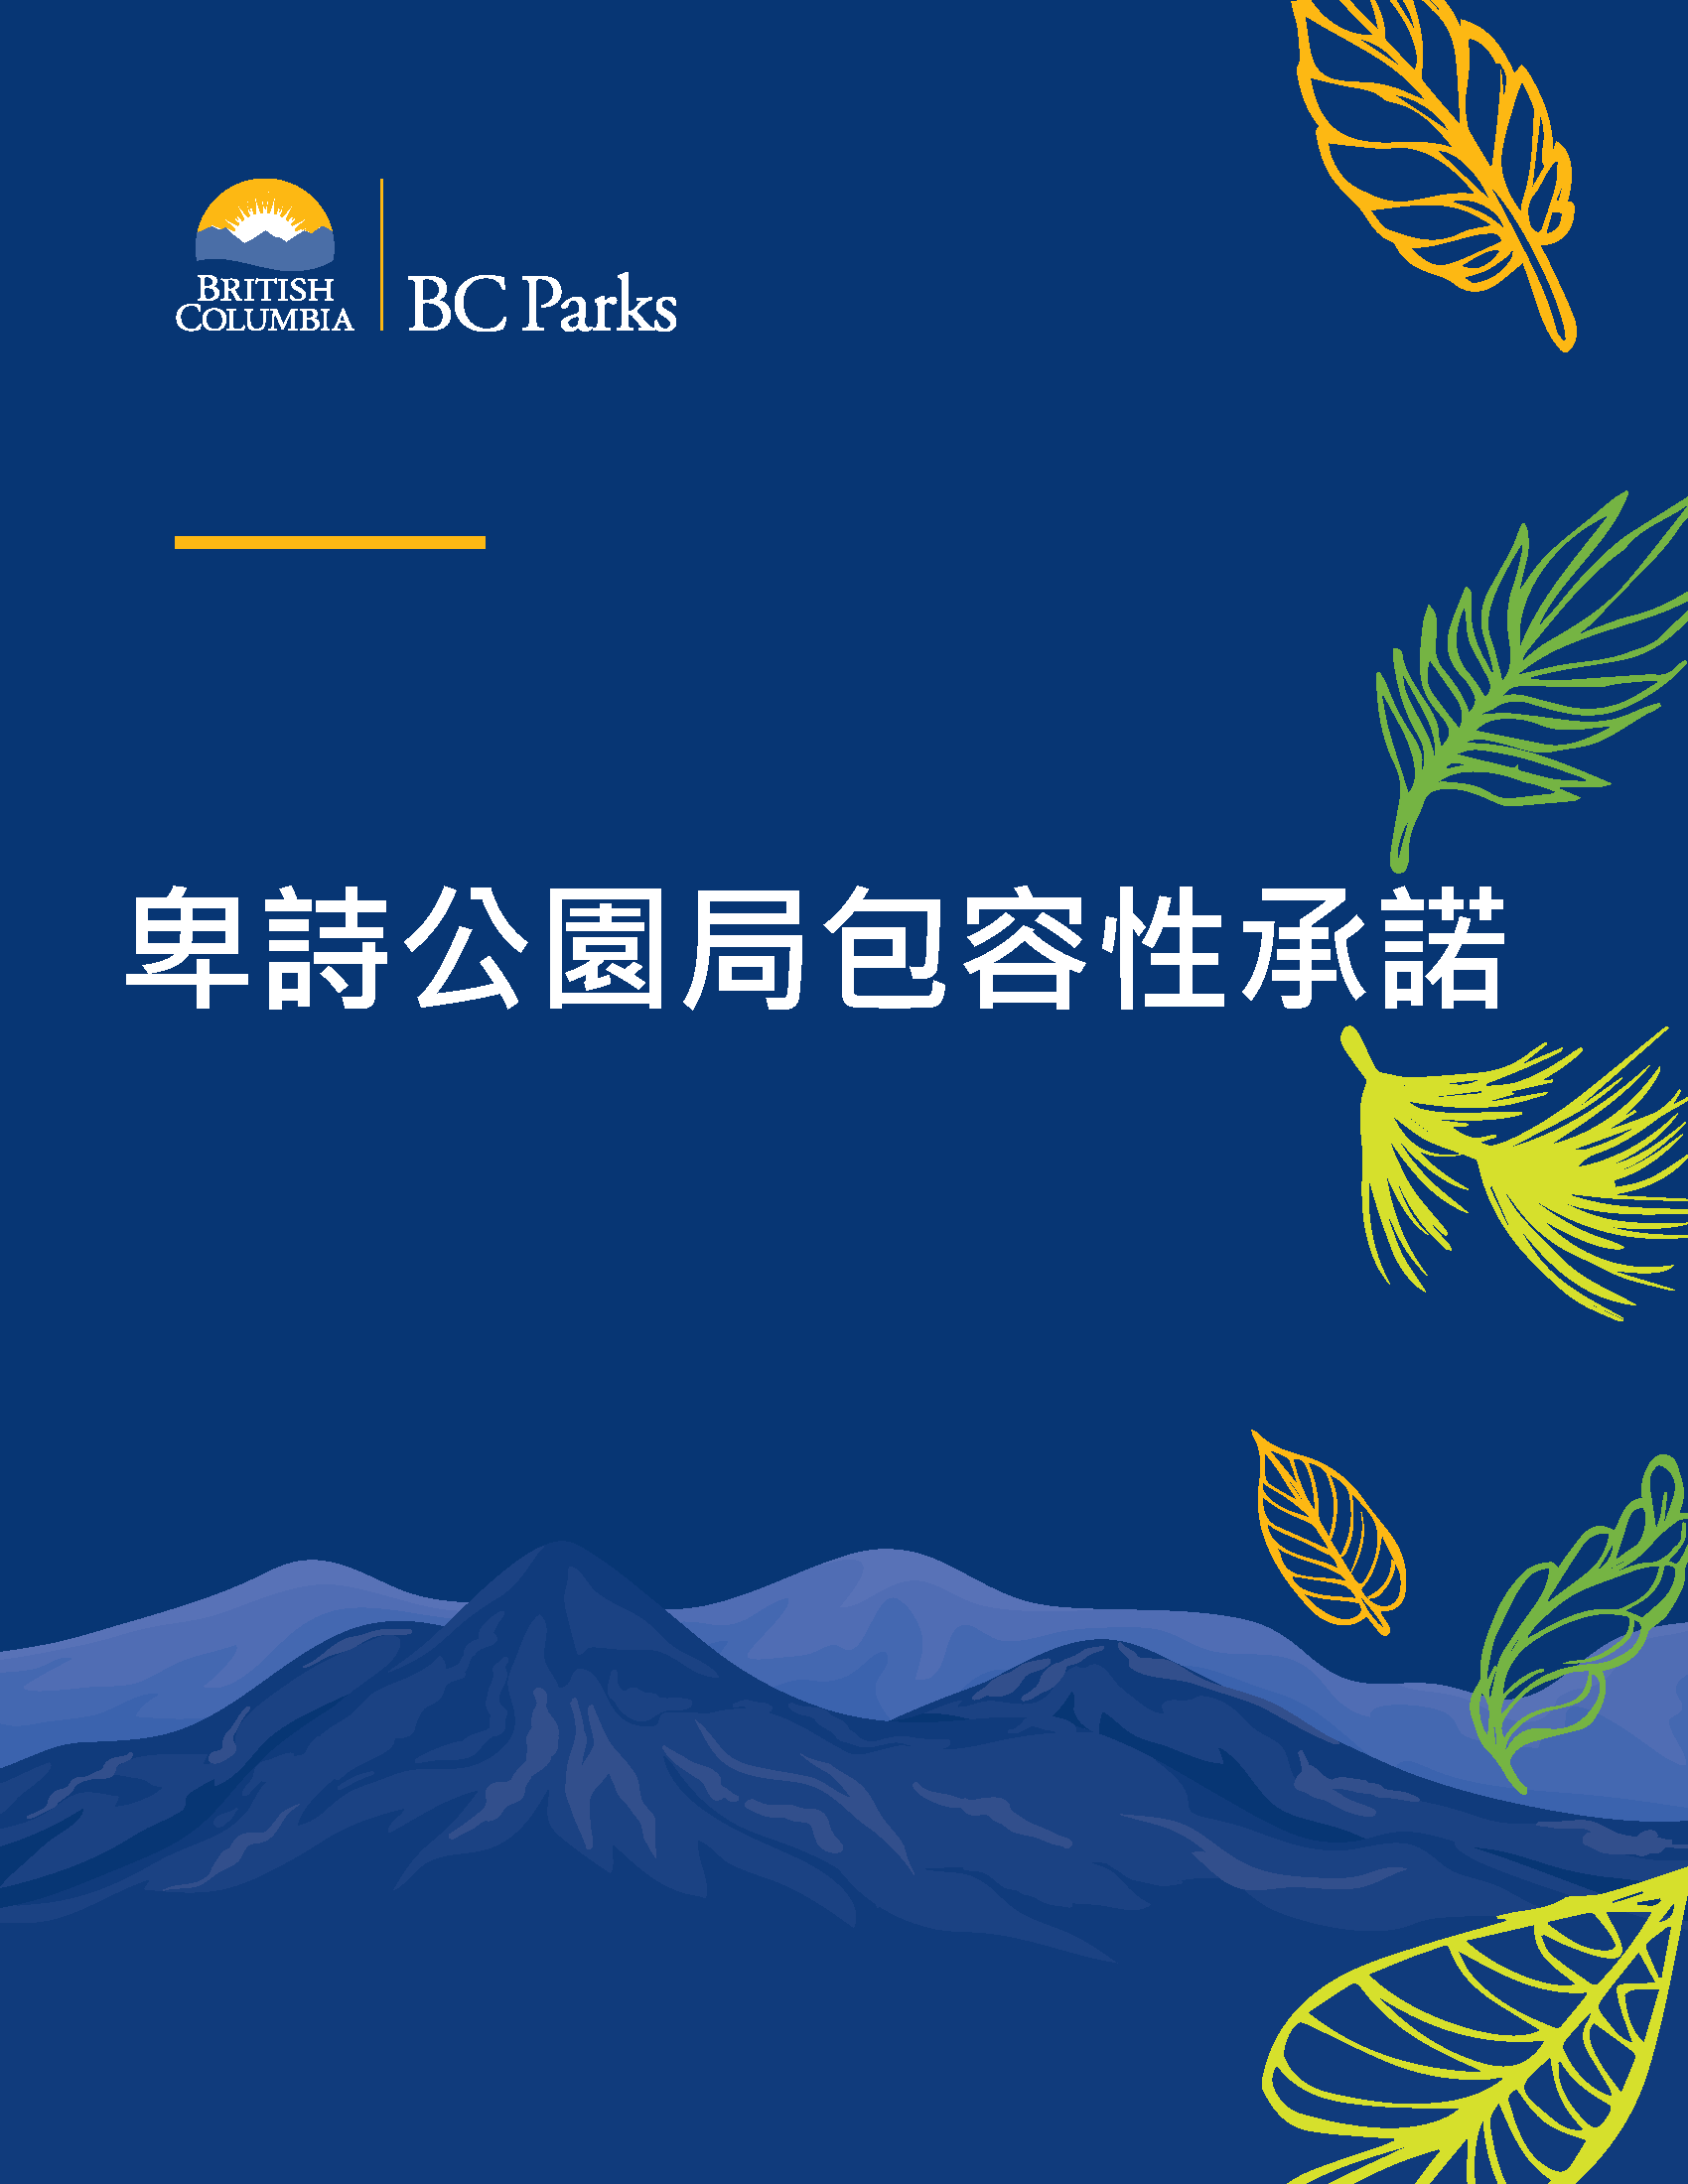 BC Parks Commitment to Inclusion in traditional Chinese